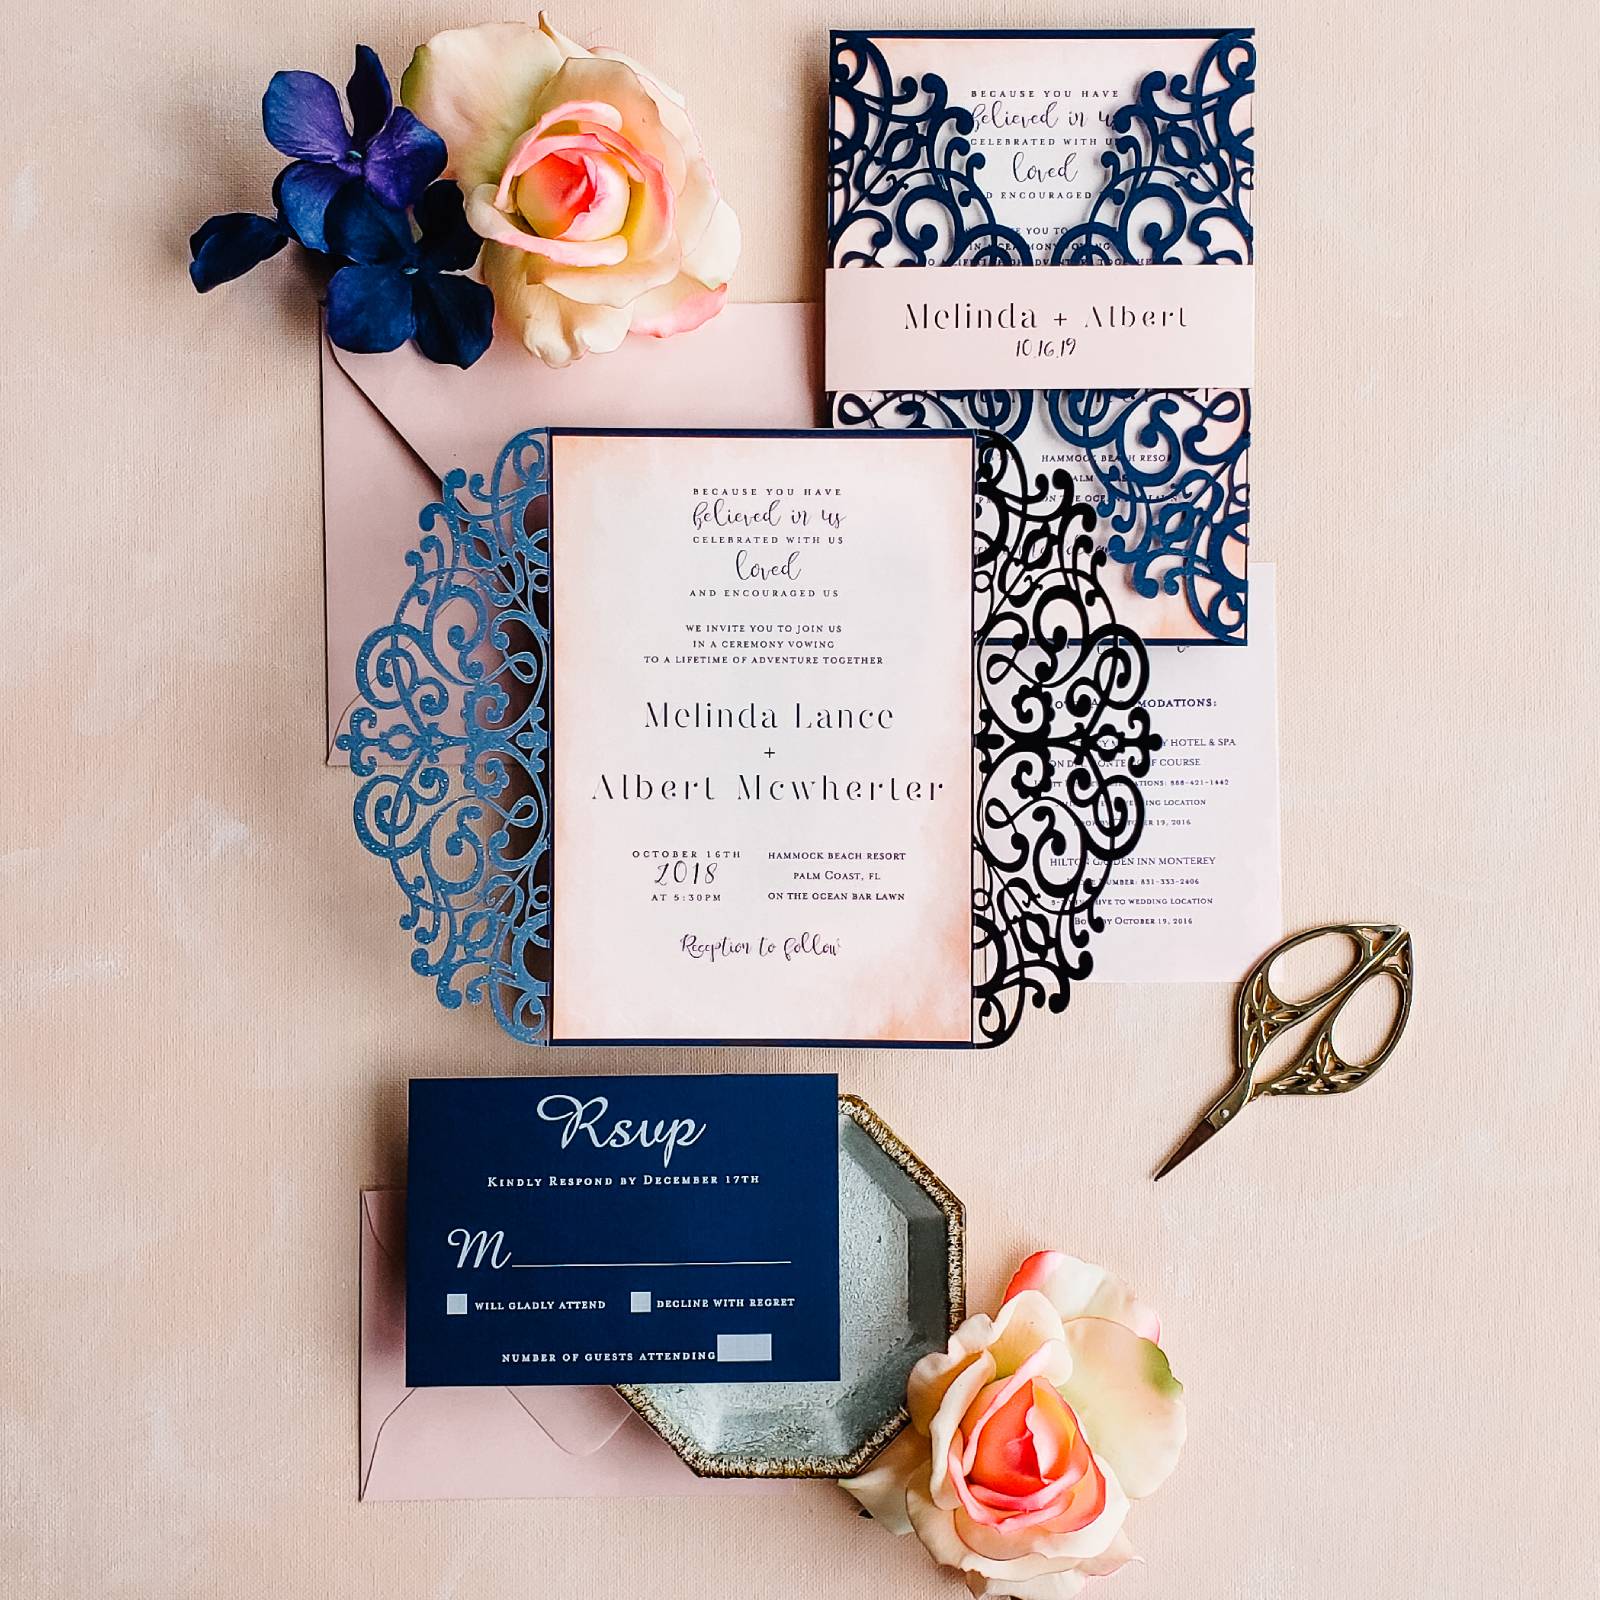 [vc_row][vc_column][vc_column_text]Purchase this listing to get a sample of our Amaryllis wedding invitation suite.

The sample includes:

• 5